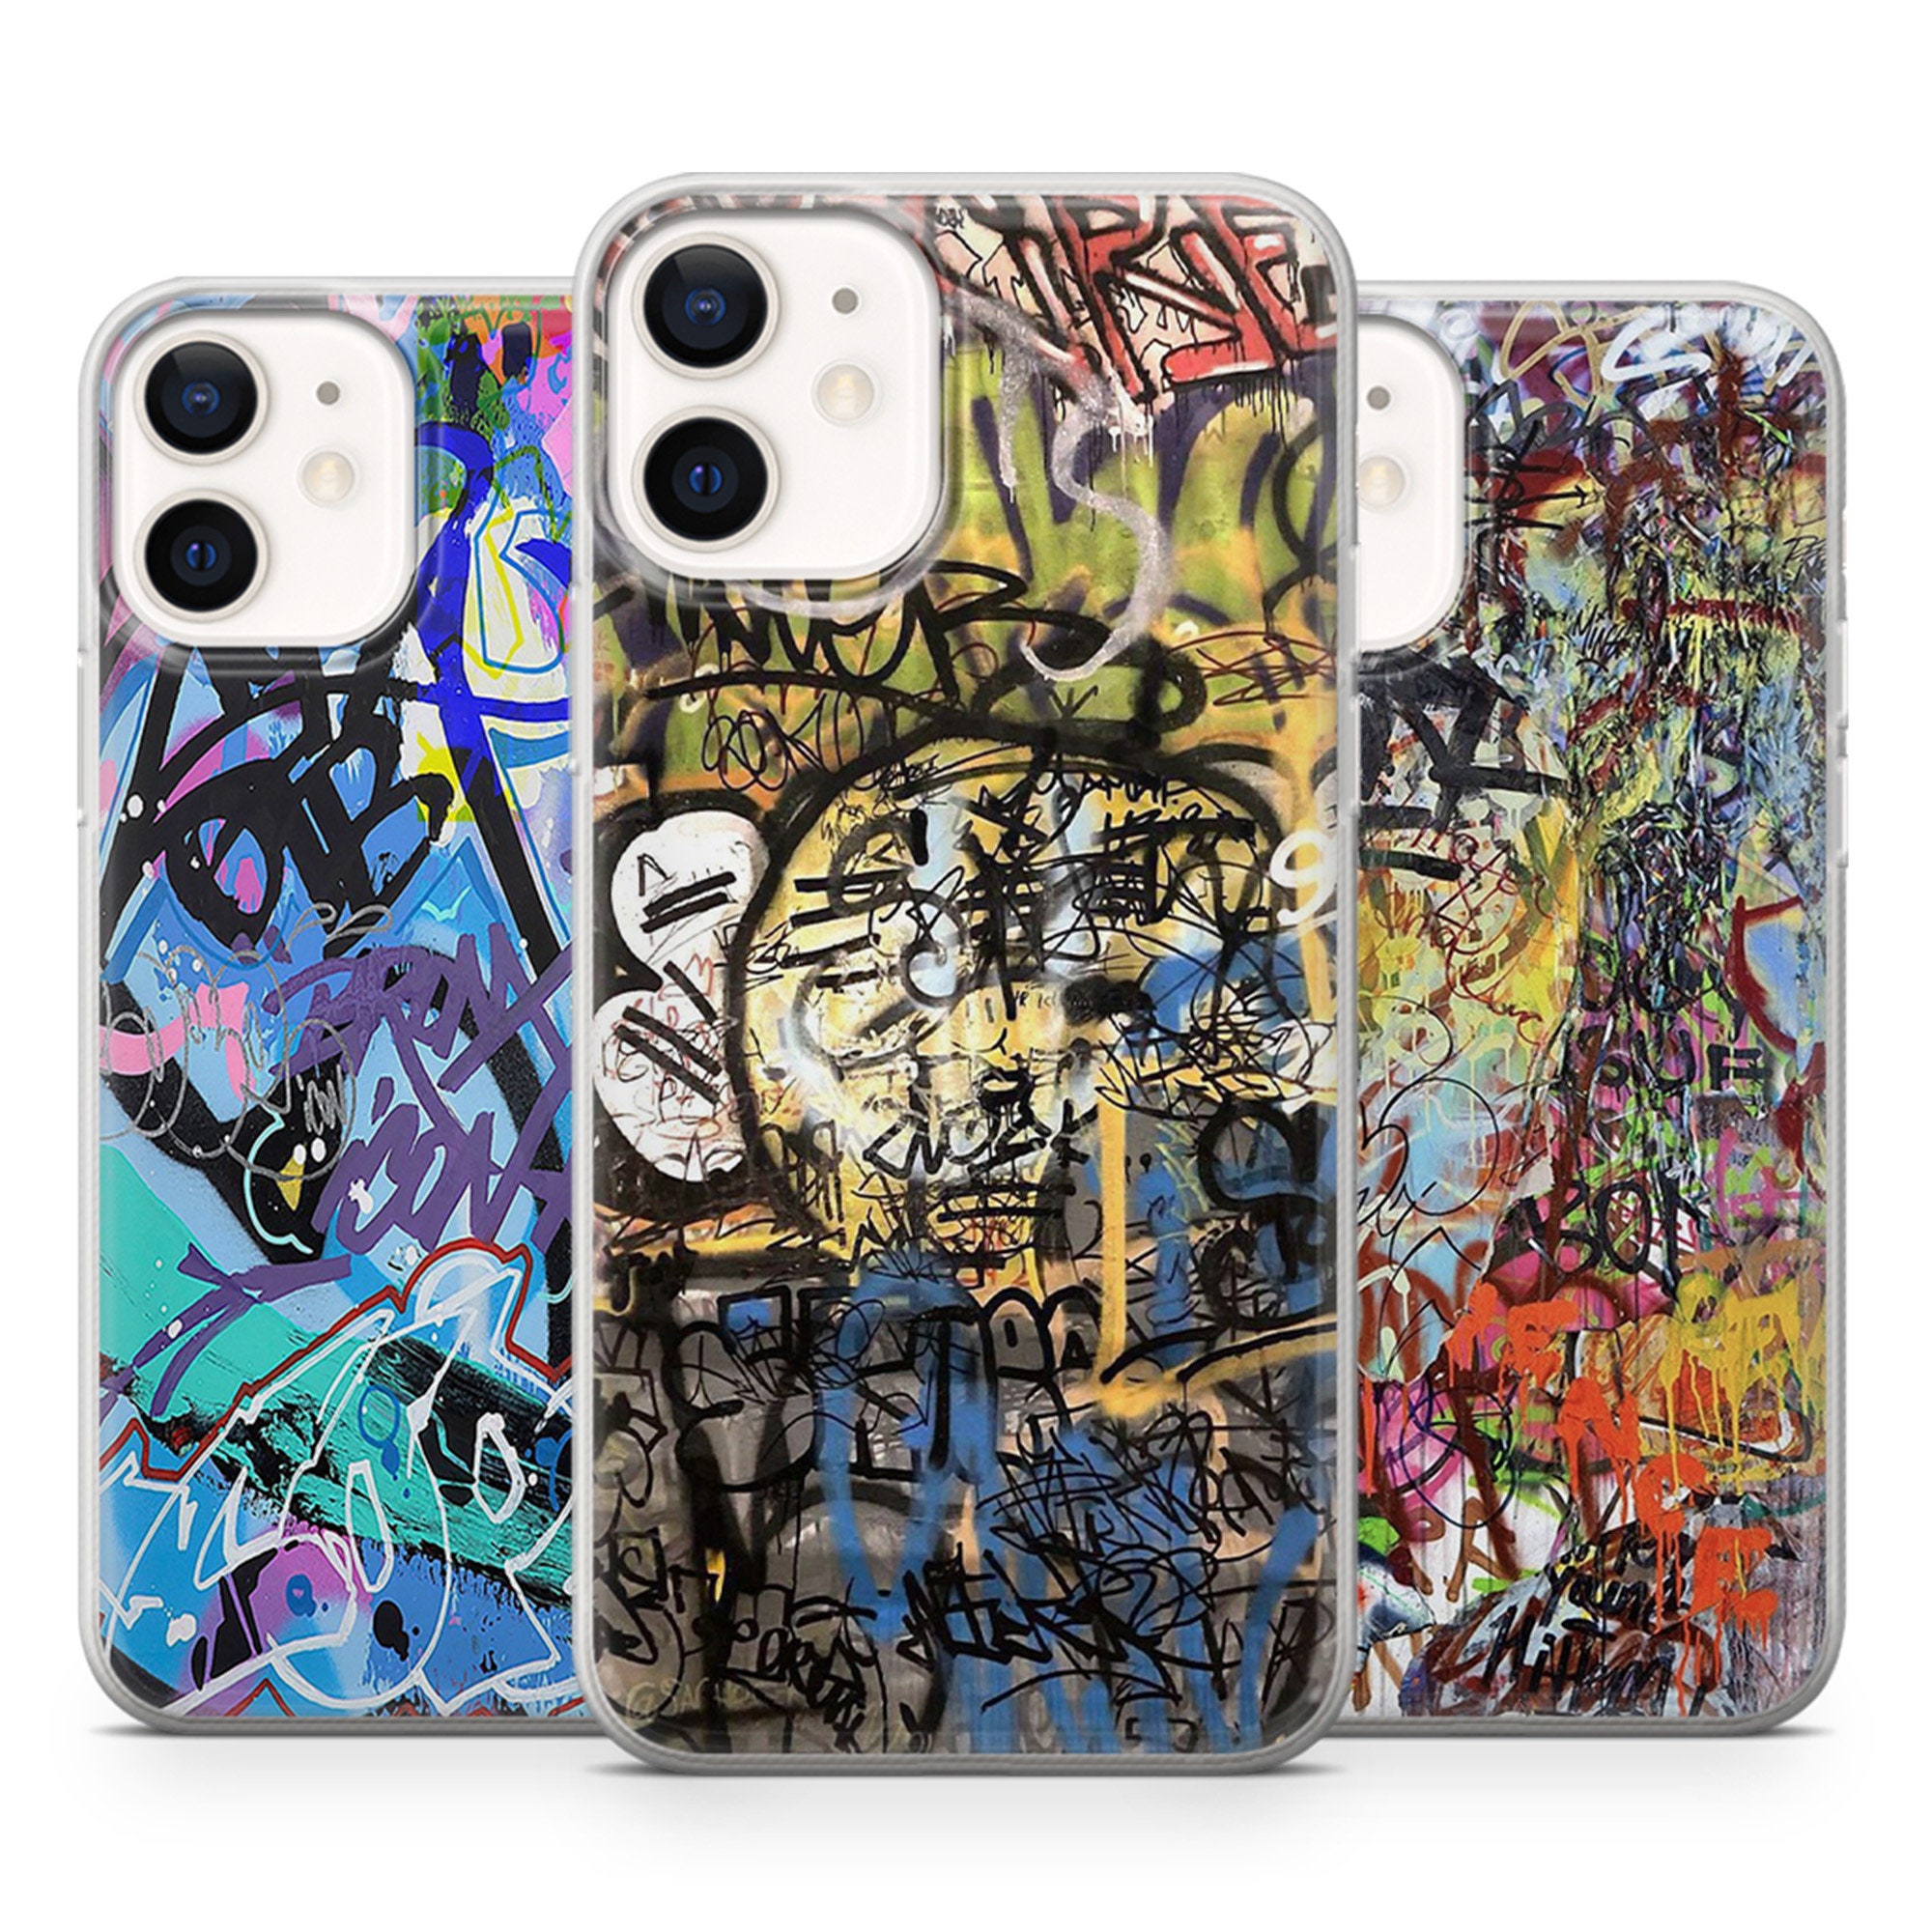 FIRST AID KIT - Utility Sticker In Graffiti Style iPhone Case for